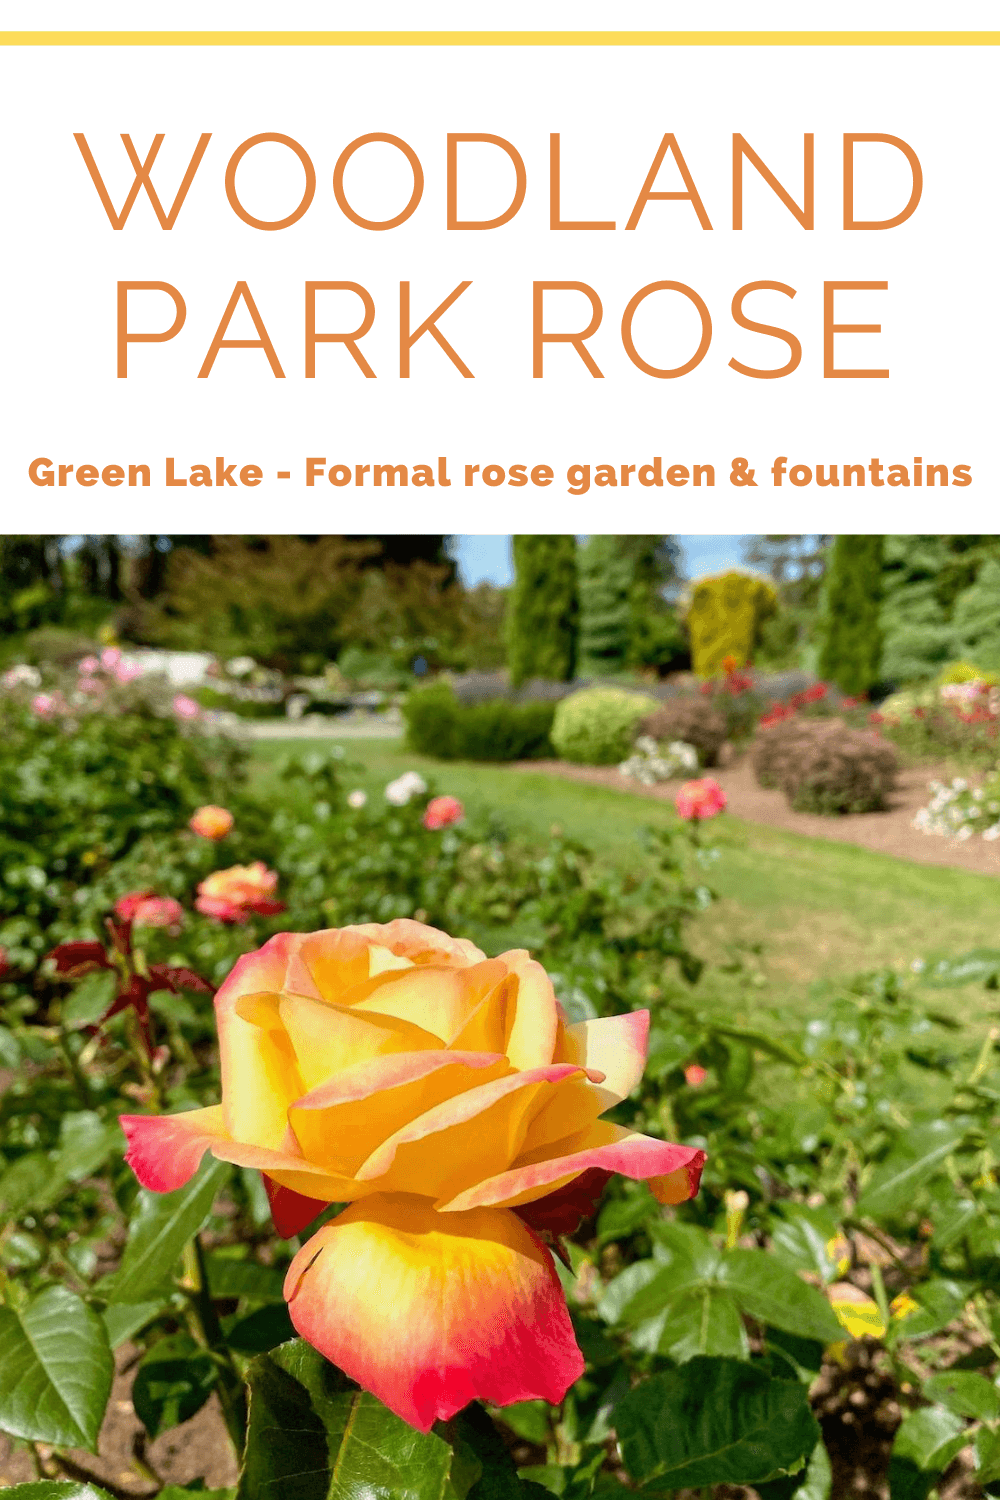 Woodland Park Rose Garden is a great Seattle garden to visit. In this photo a yellow rose with red edges seems to look up to the blue sky and sun on a bright day. The foliage in the background is out of focus, showing only sporadic pops of color and the textures of the shrubbery framing the garden.